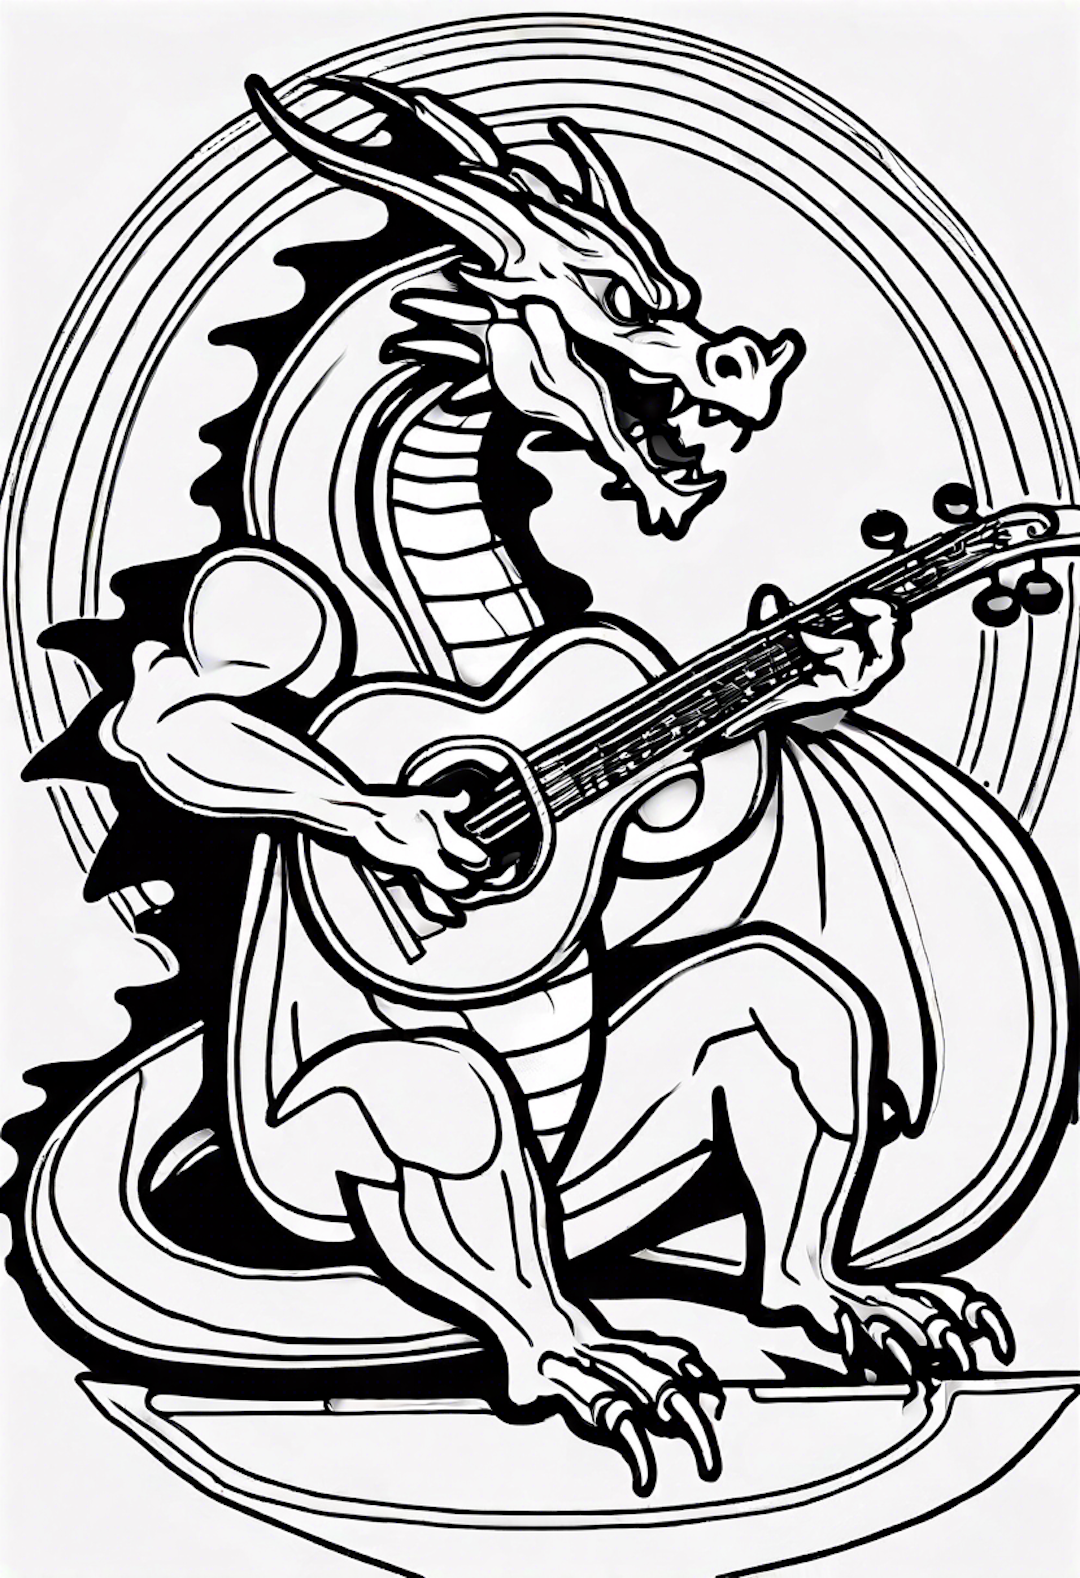 Dragon Playing A Musical Instrument